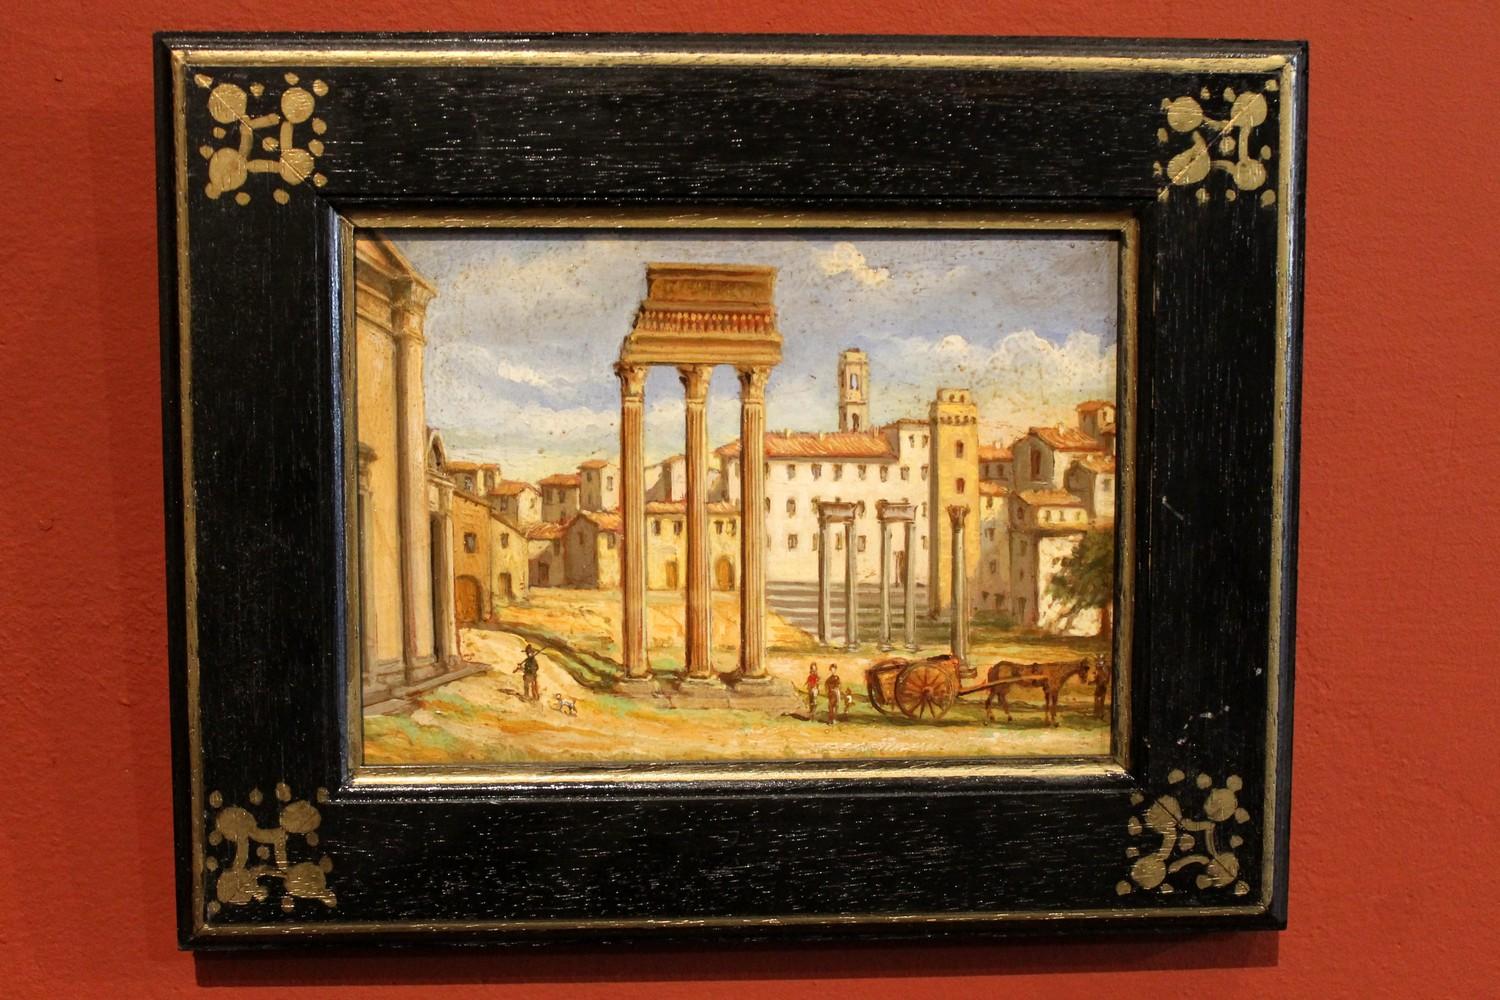 Wood Italian Late 19th Century Oil on Board Classical Roman Ruins Landscape Painting